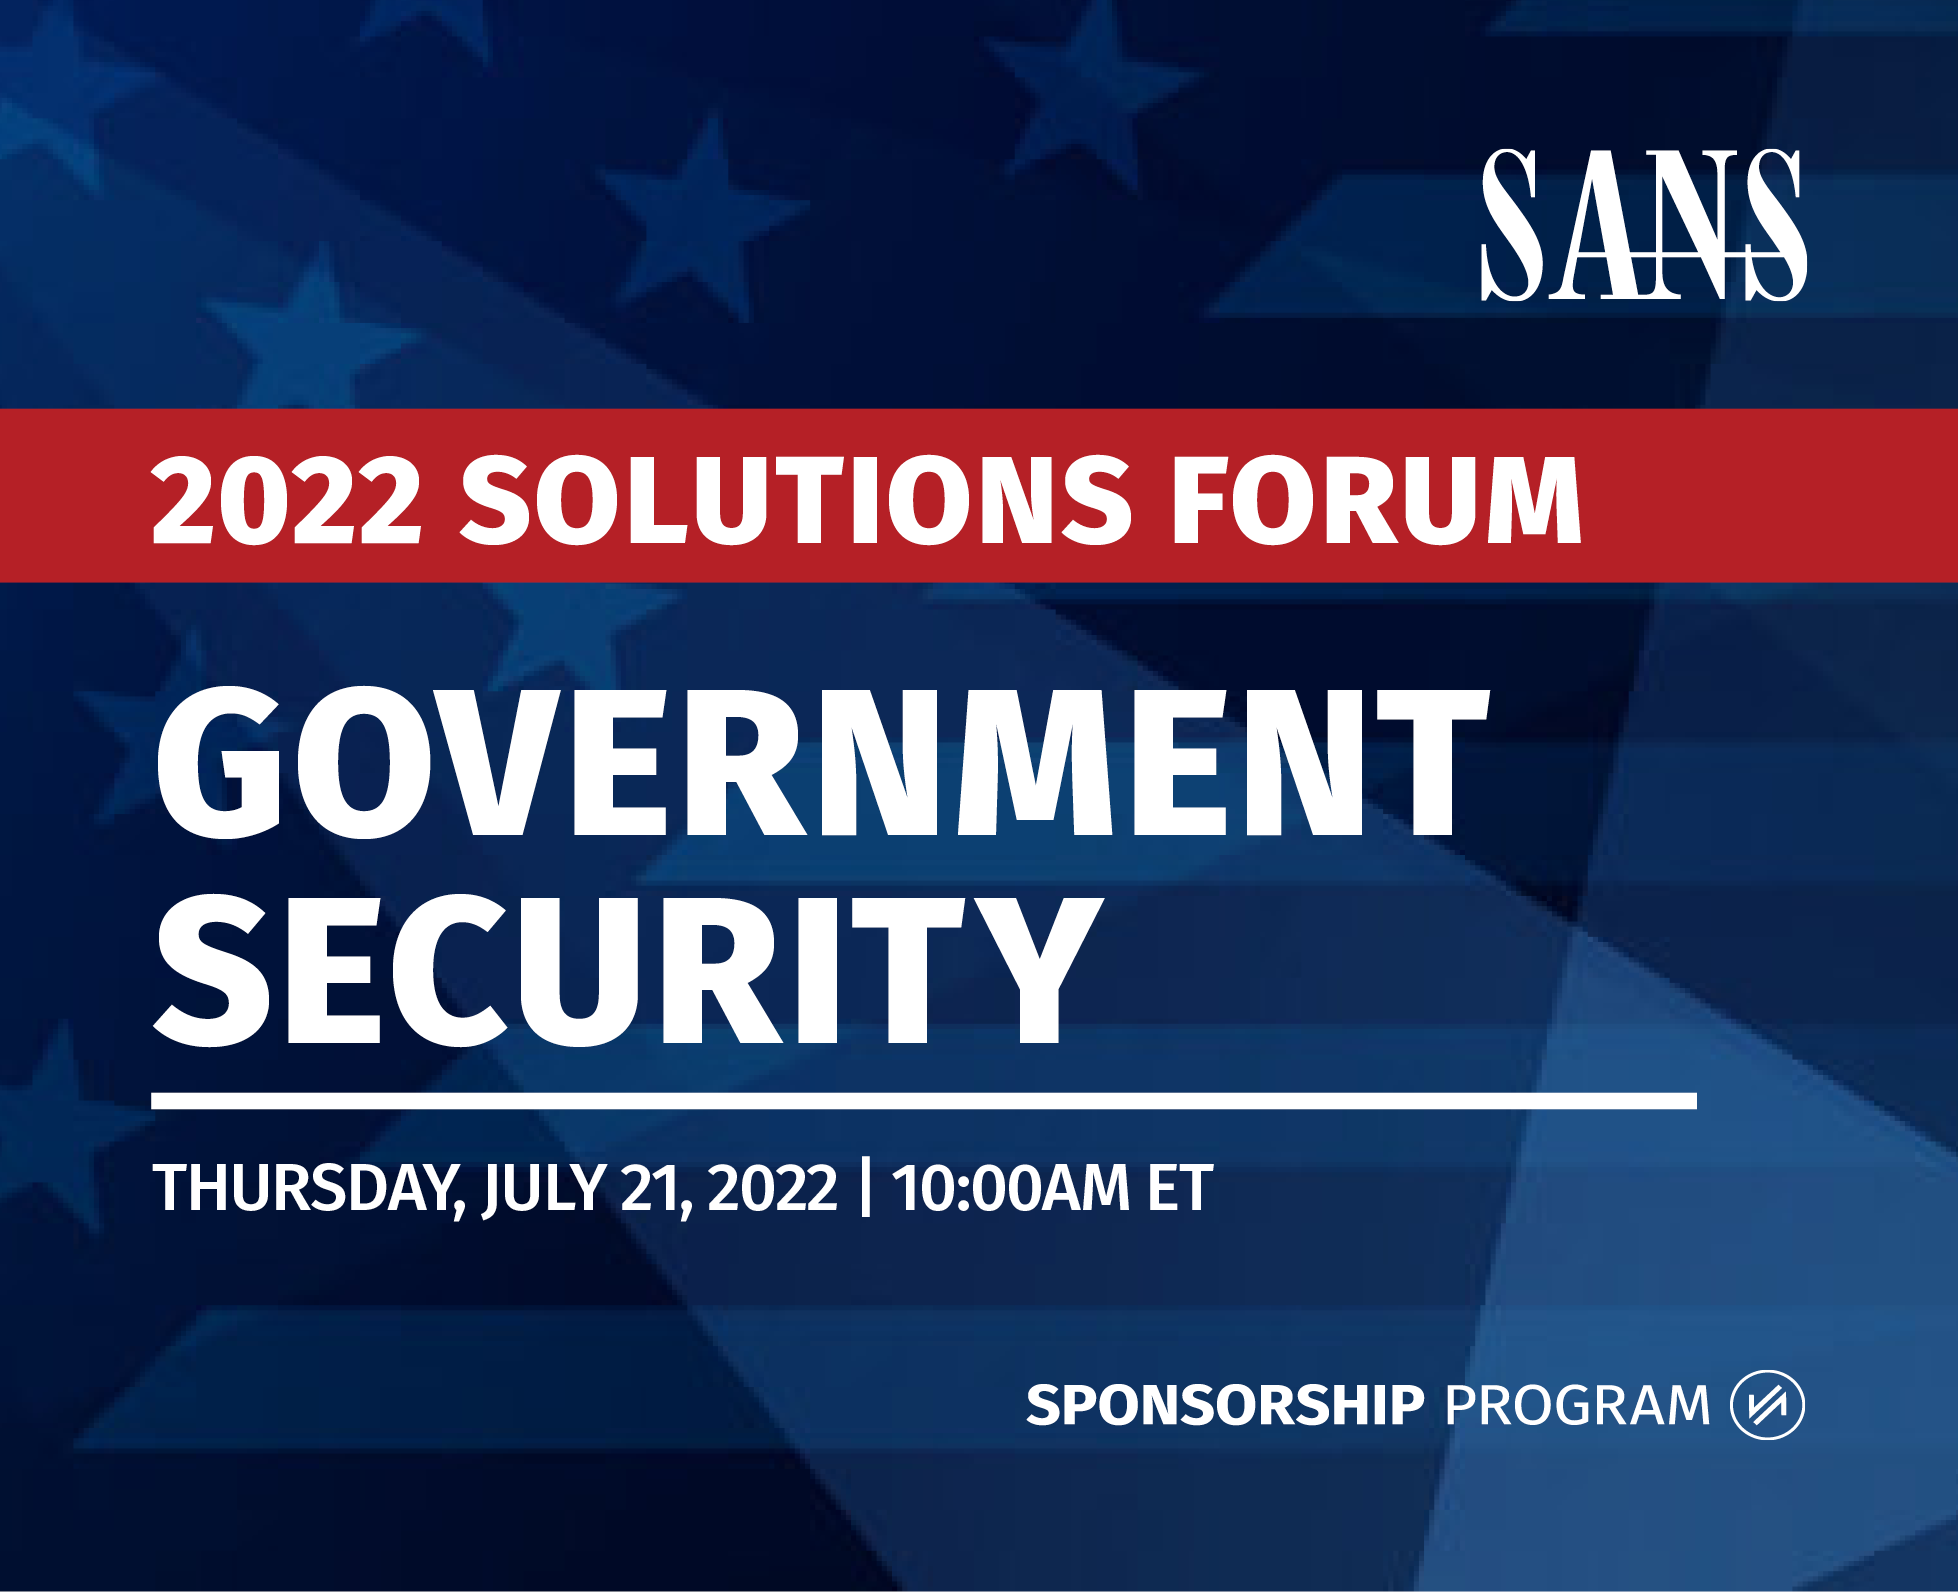 Government Security Solutions Forum